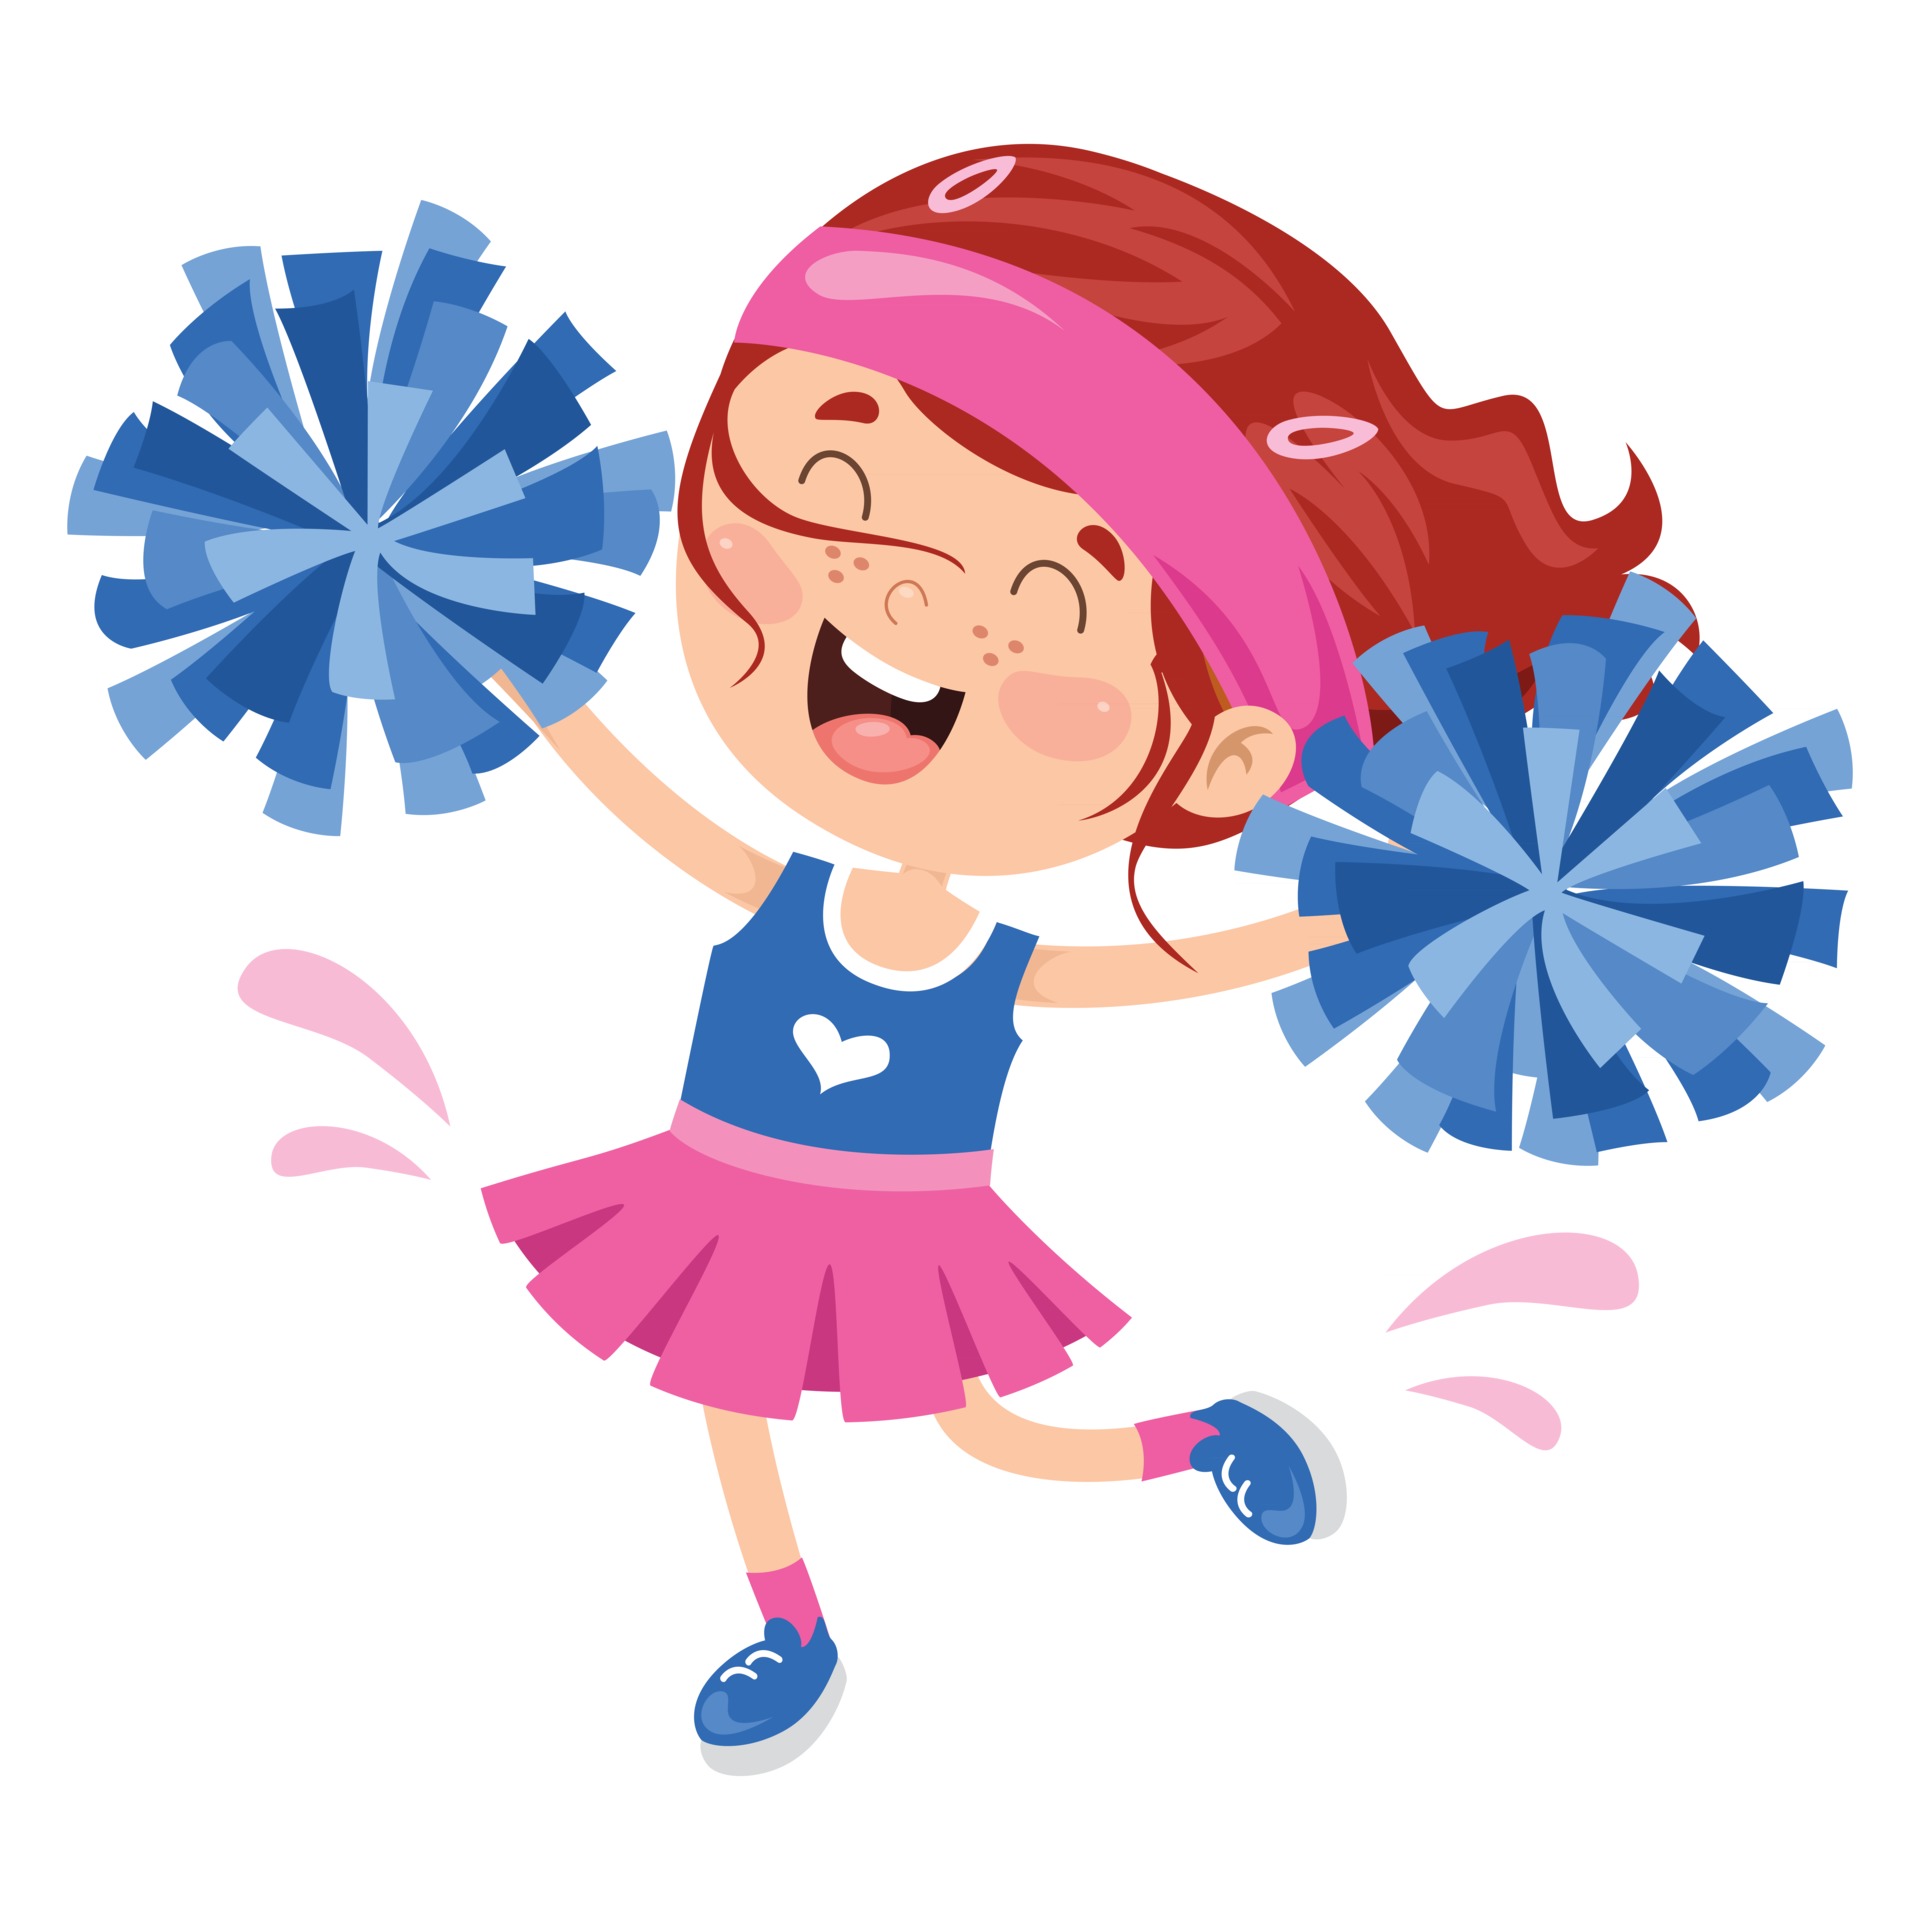 https://static.vecteezy.com/system/resources/previews/002/539/130/original/funny-cheerleader-holding-colorful-pom-poms-vector.jpg